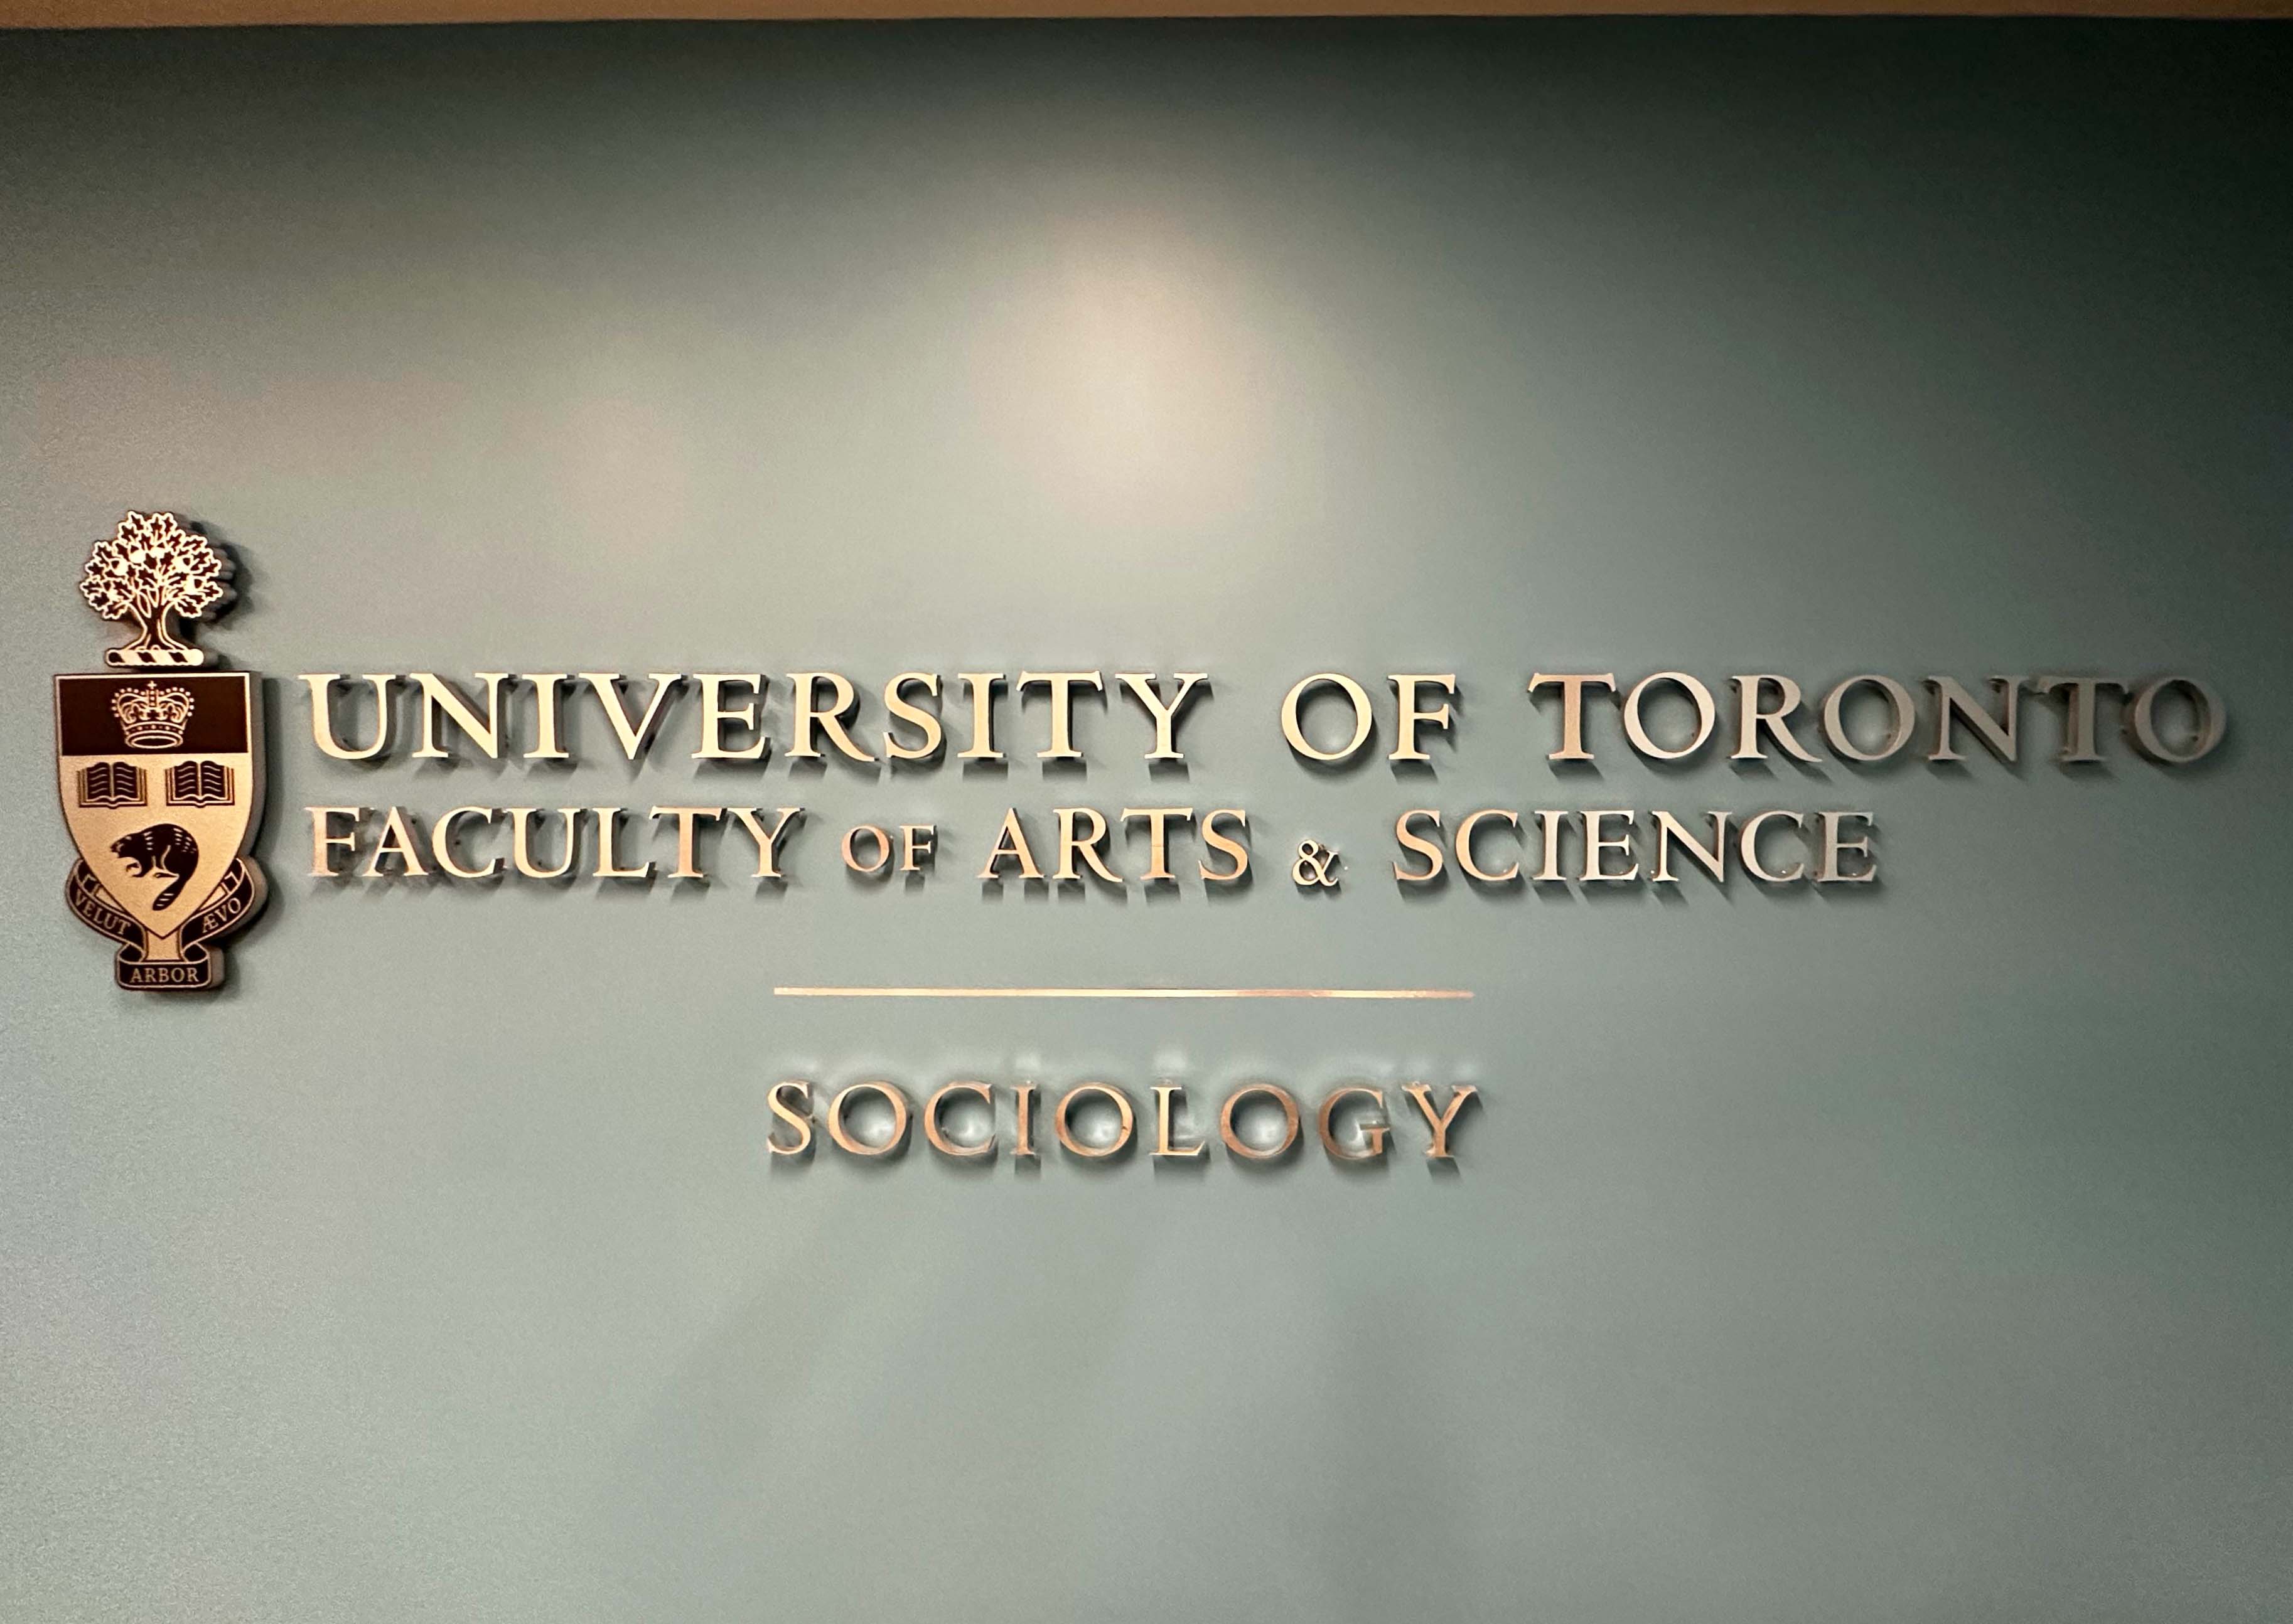 Department of Sociology sign on the wall